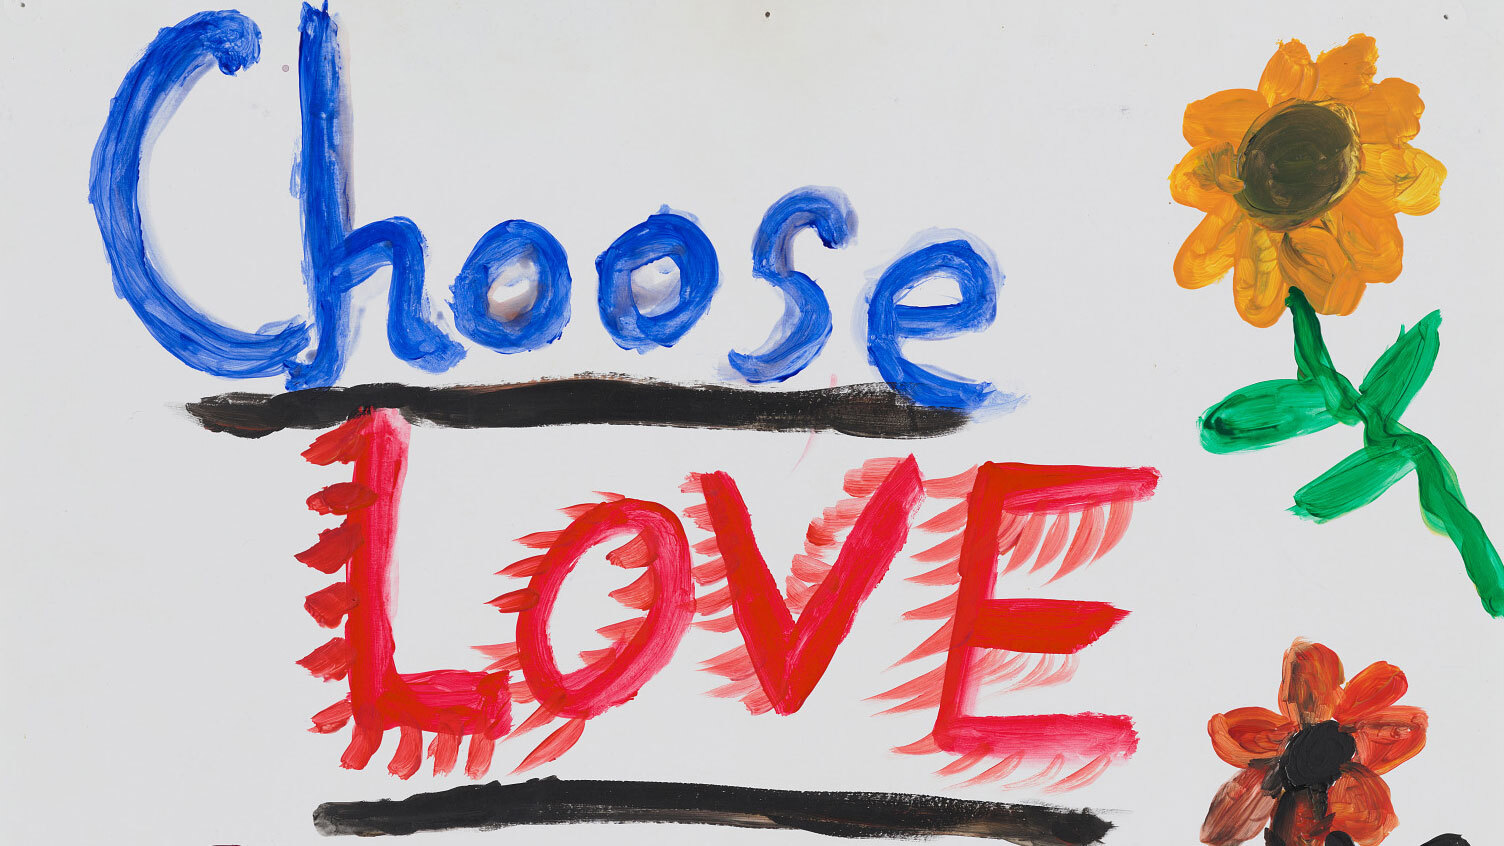 Sign with "Choose Love"